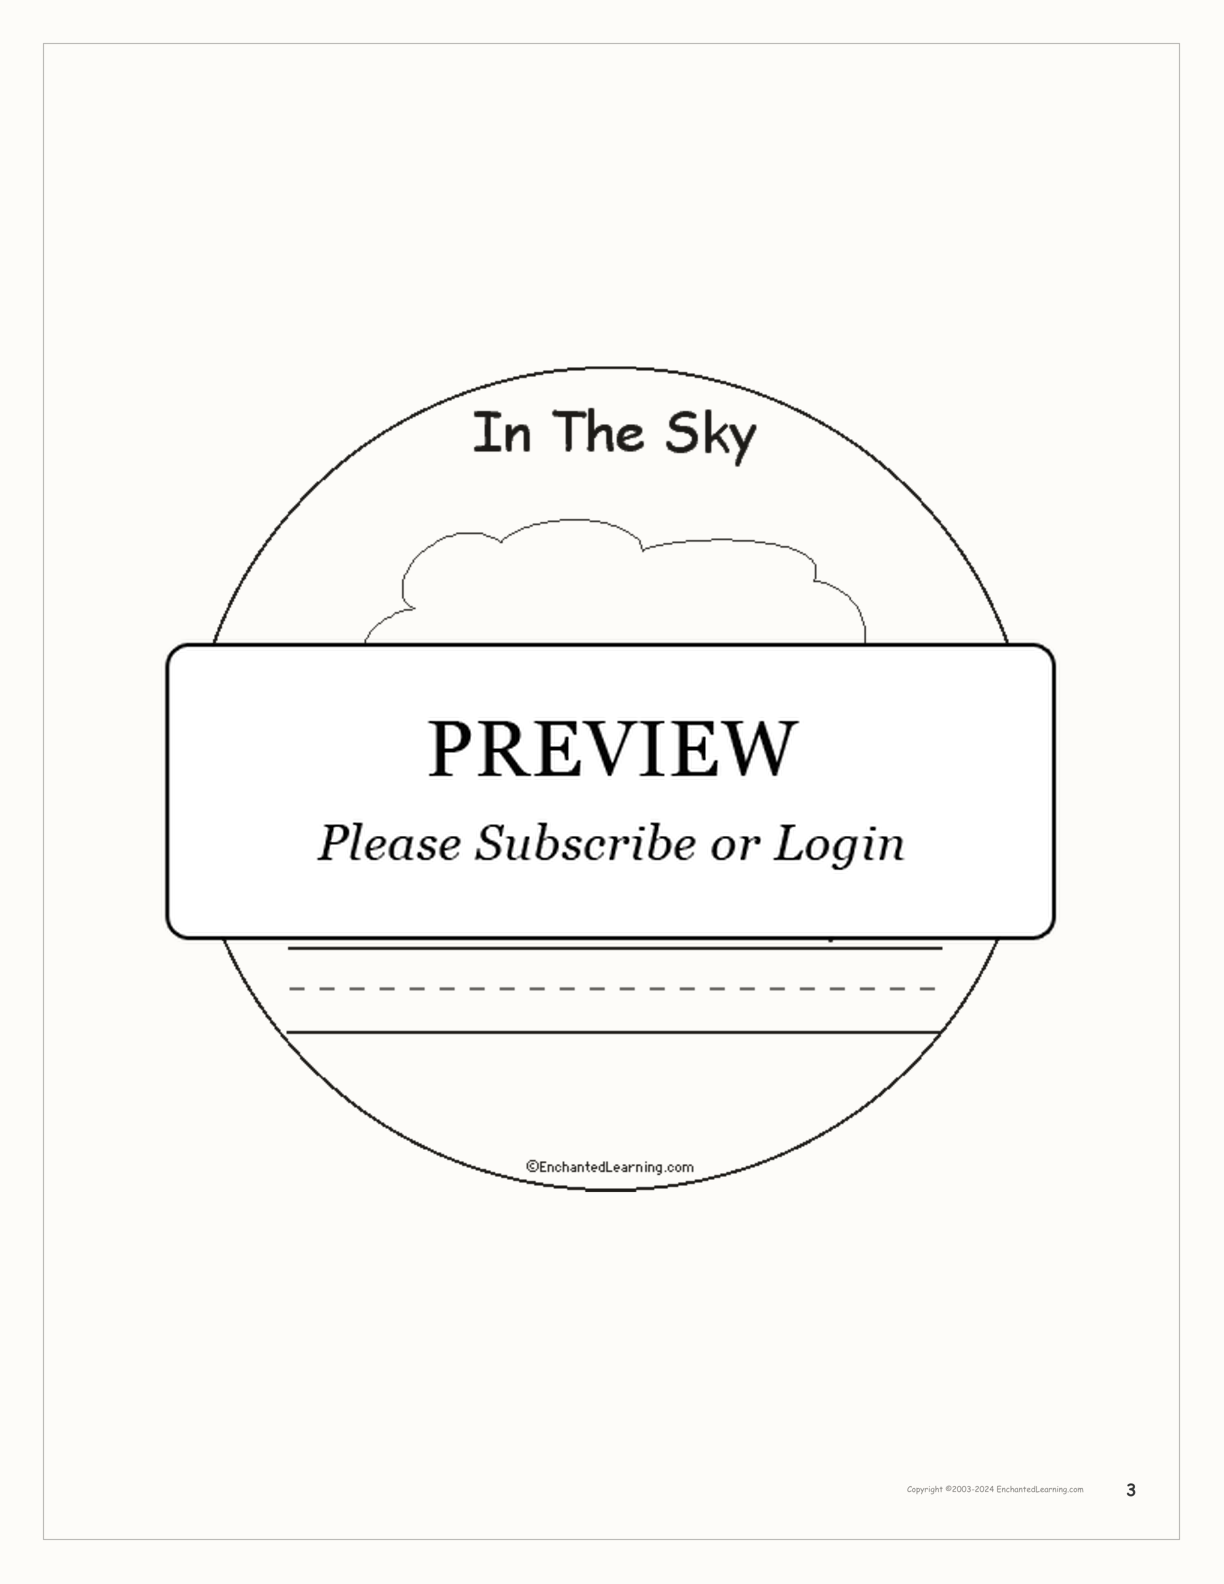 'In The Sky' Book interactive printout page 3